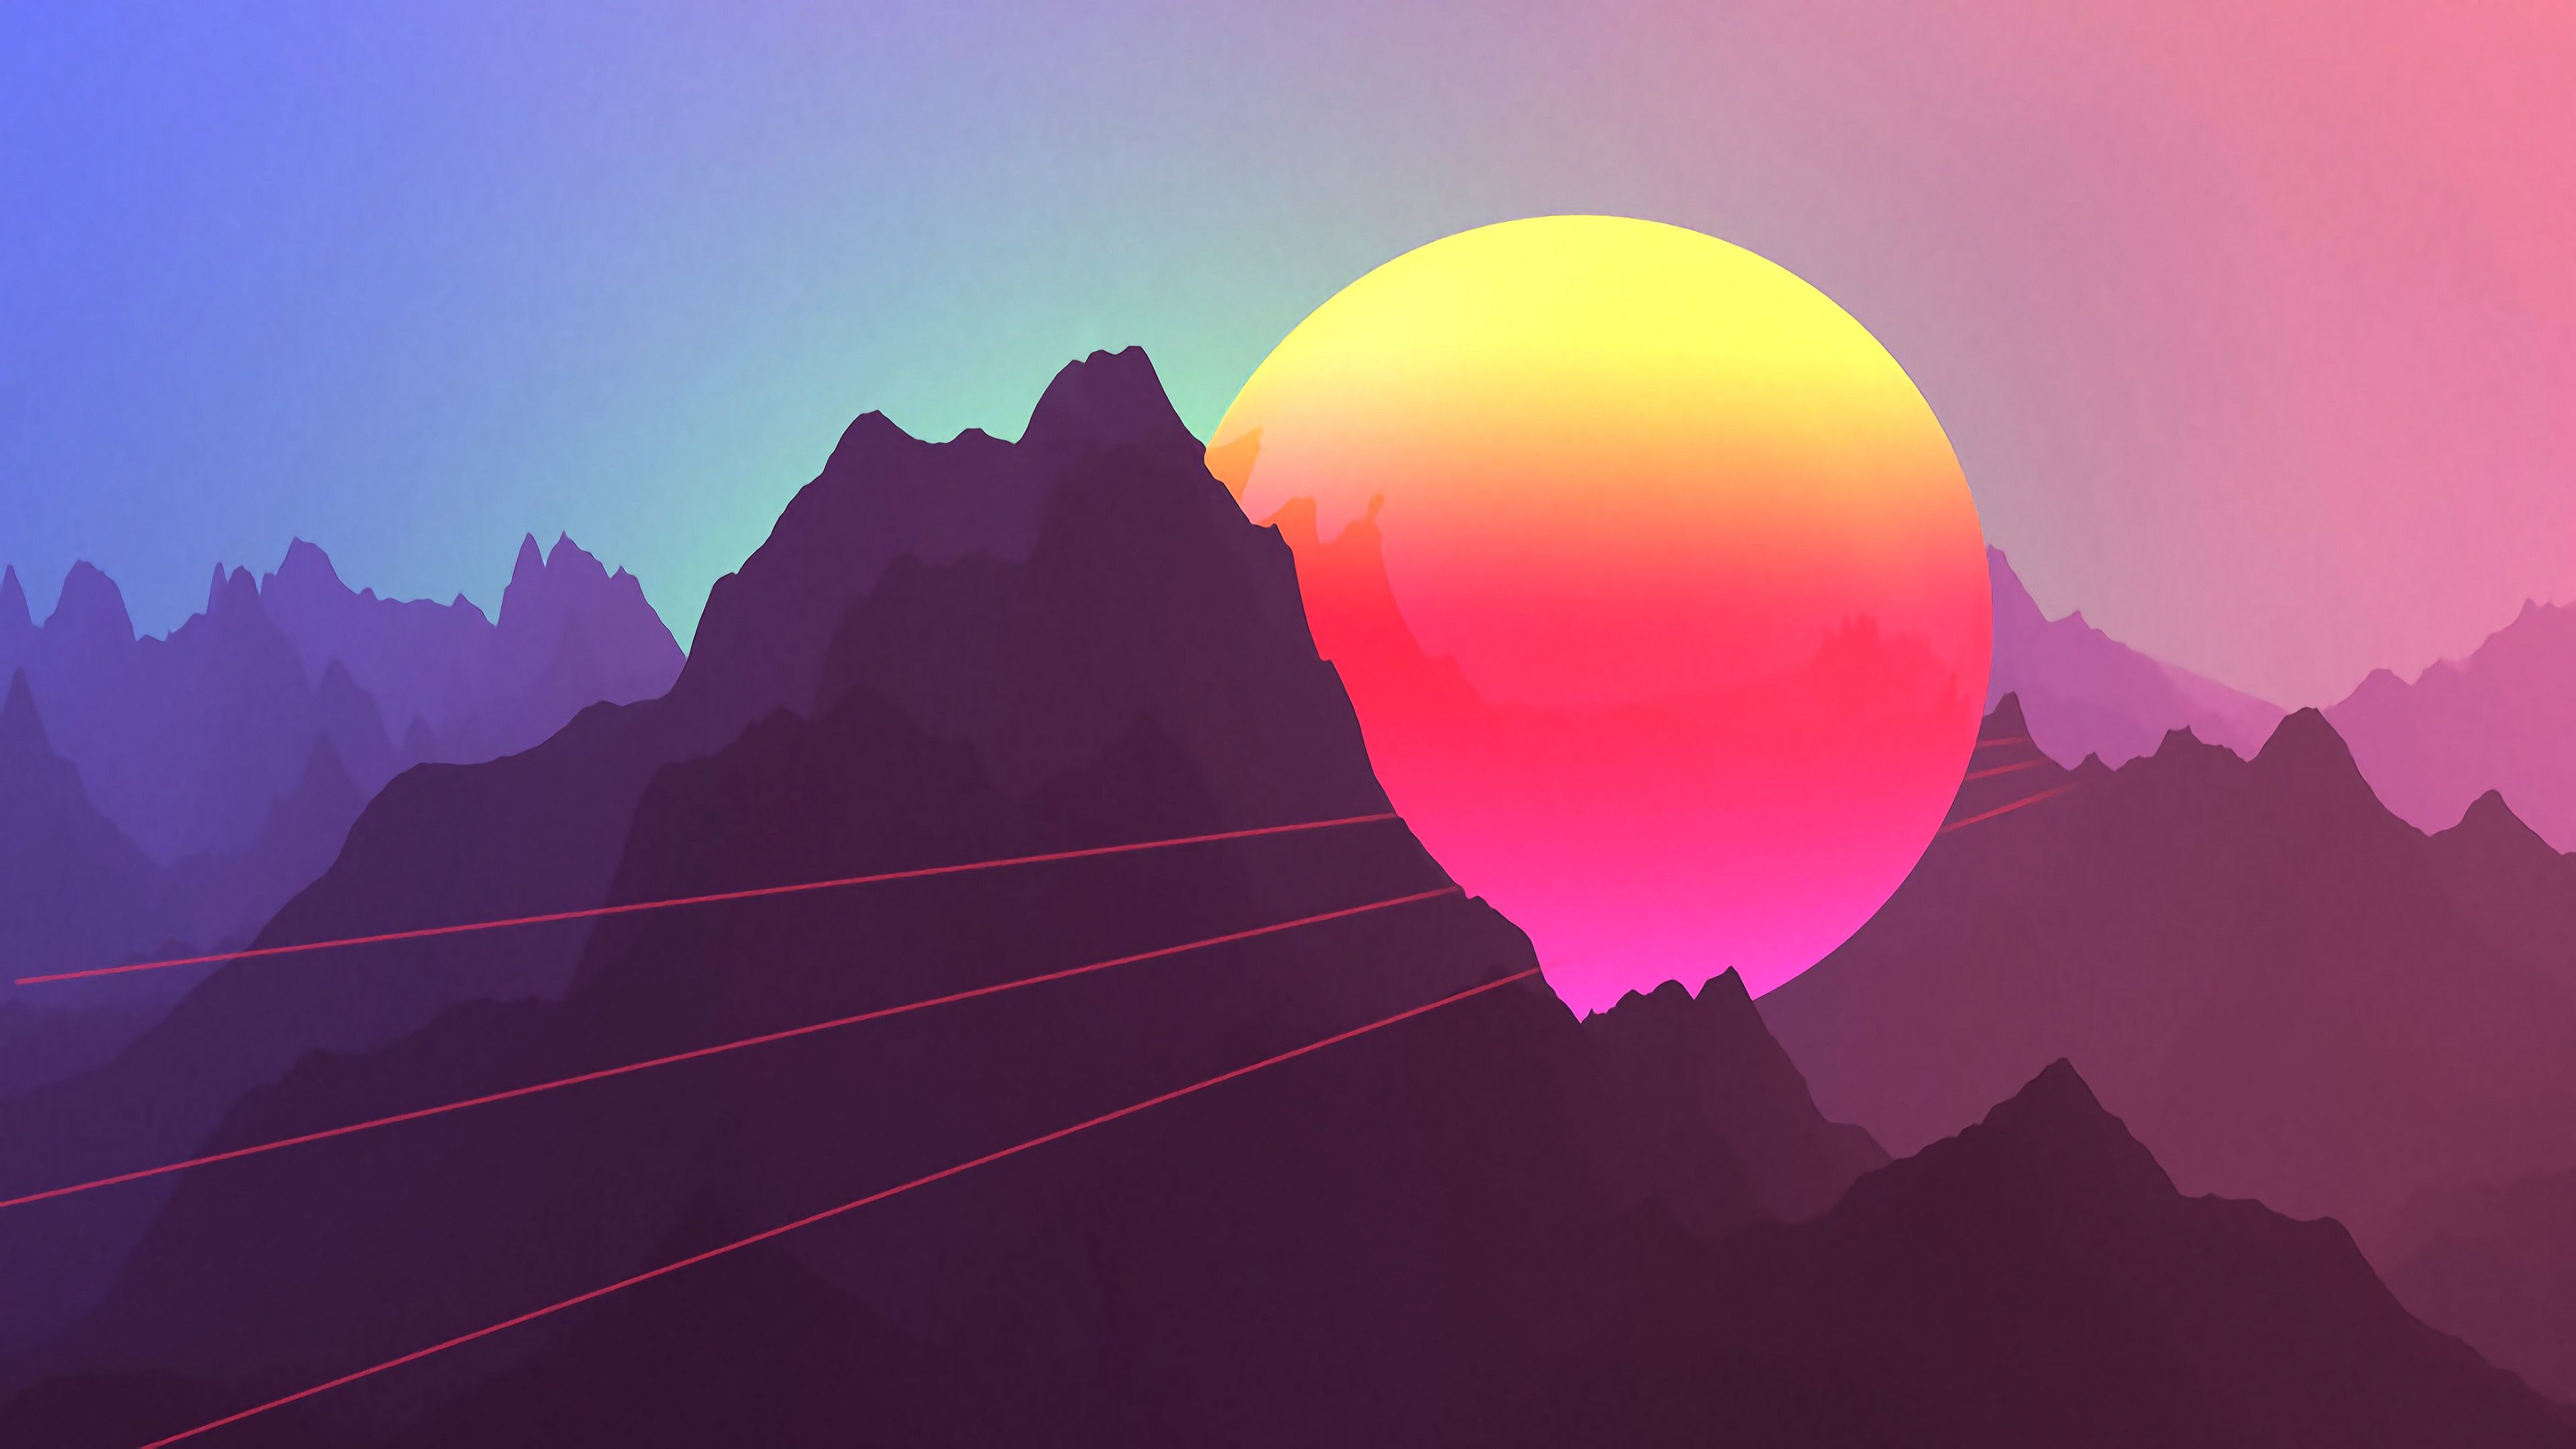 neon, Sunset, Mountains, Retro style Wallpaper HD / Desktop and Mobile Background